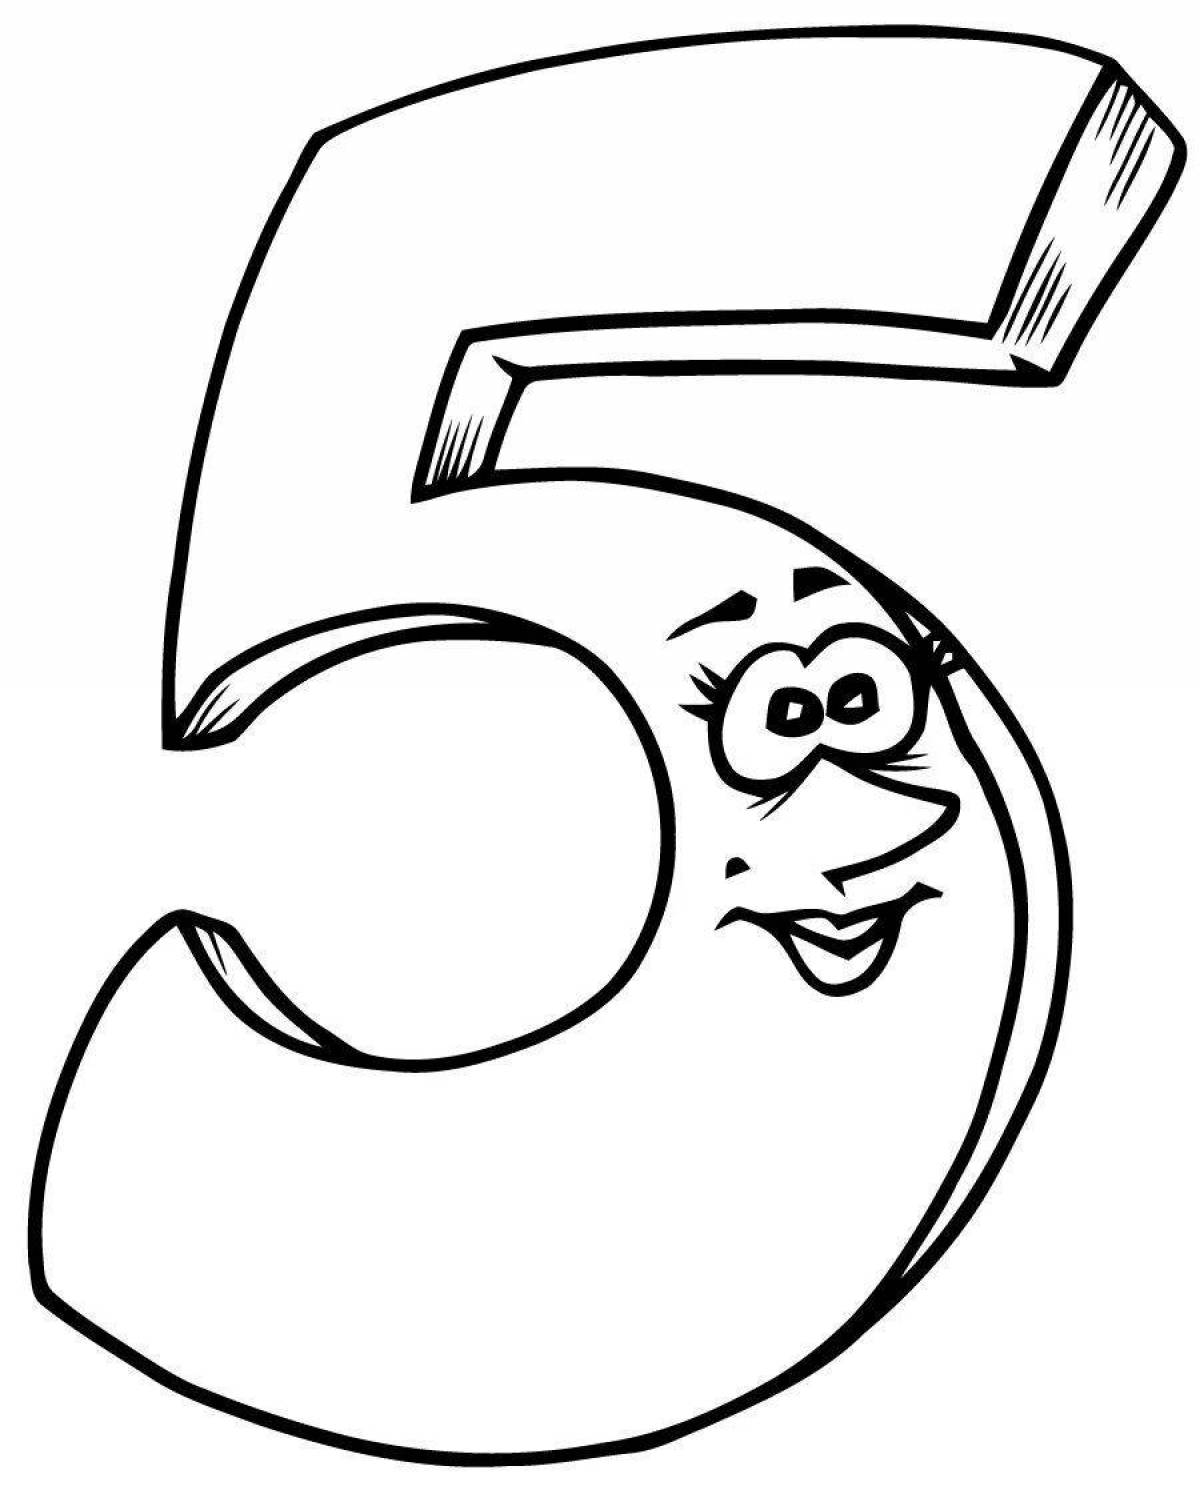 Bright coloring page numbers